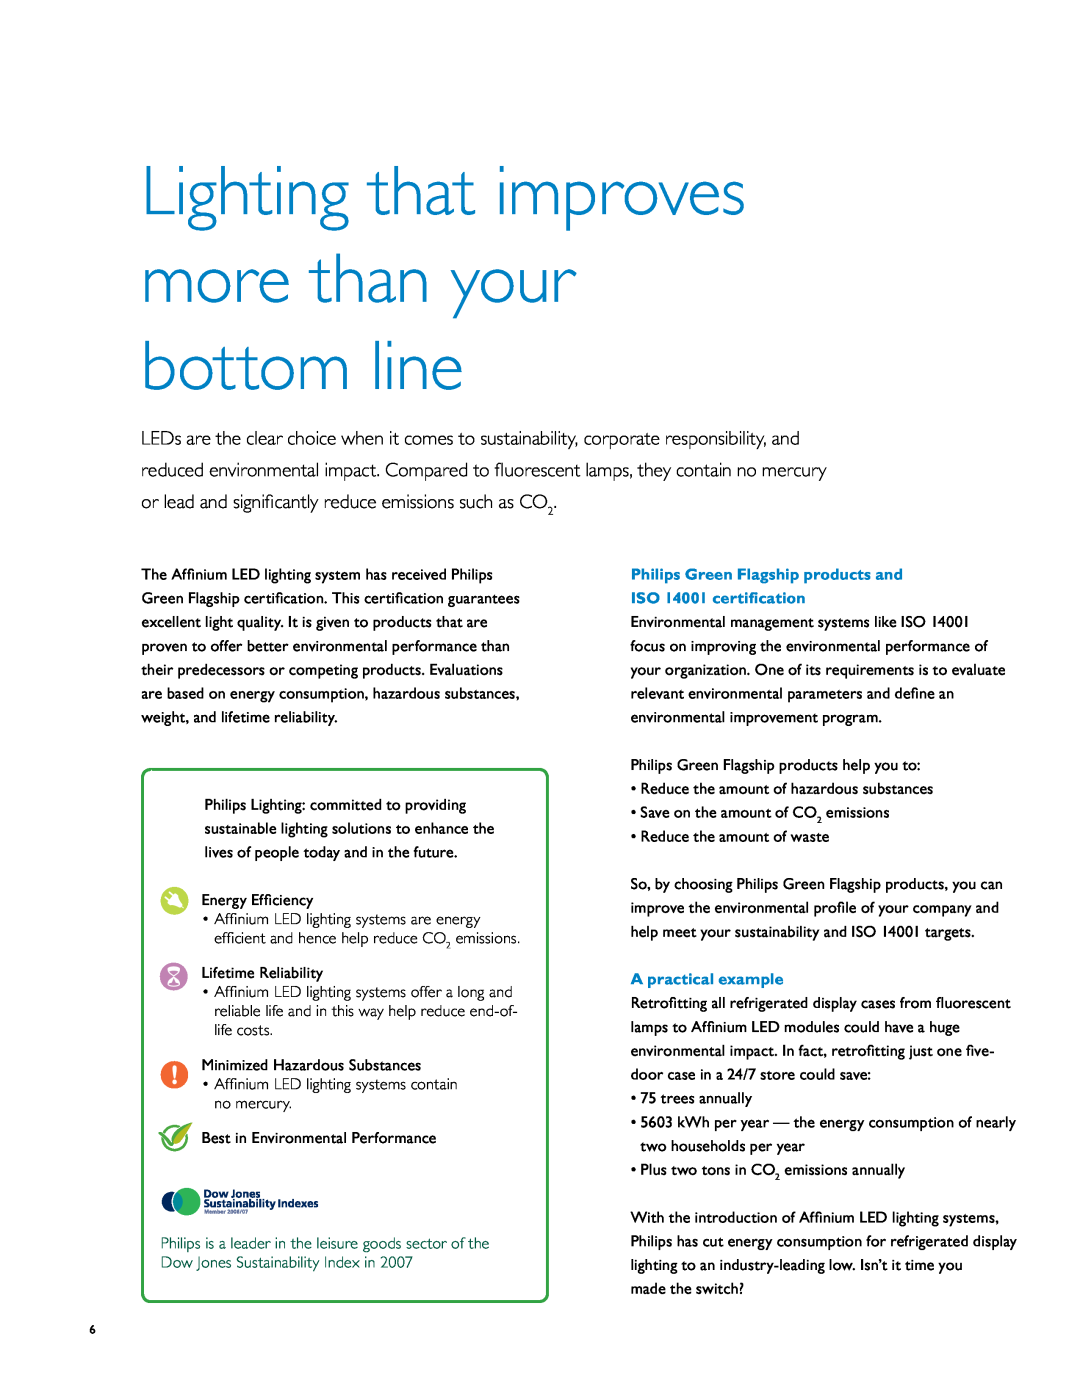 Philips T12HO Lighting that improves more than your bottom line, Philips Green Flagship products and, A practical example 